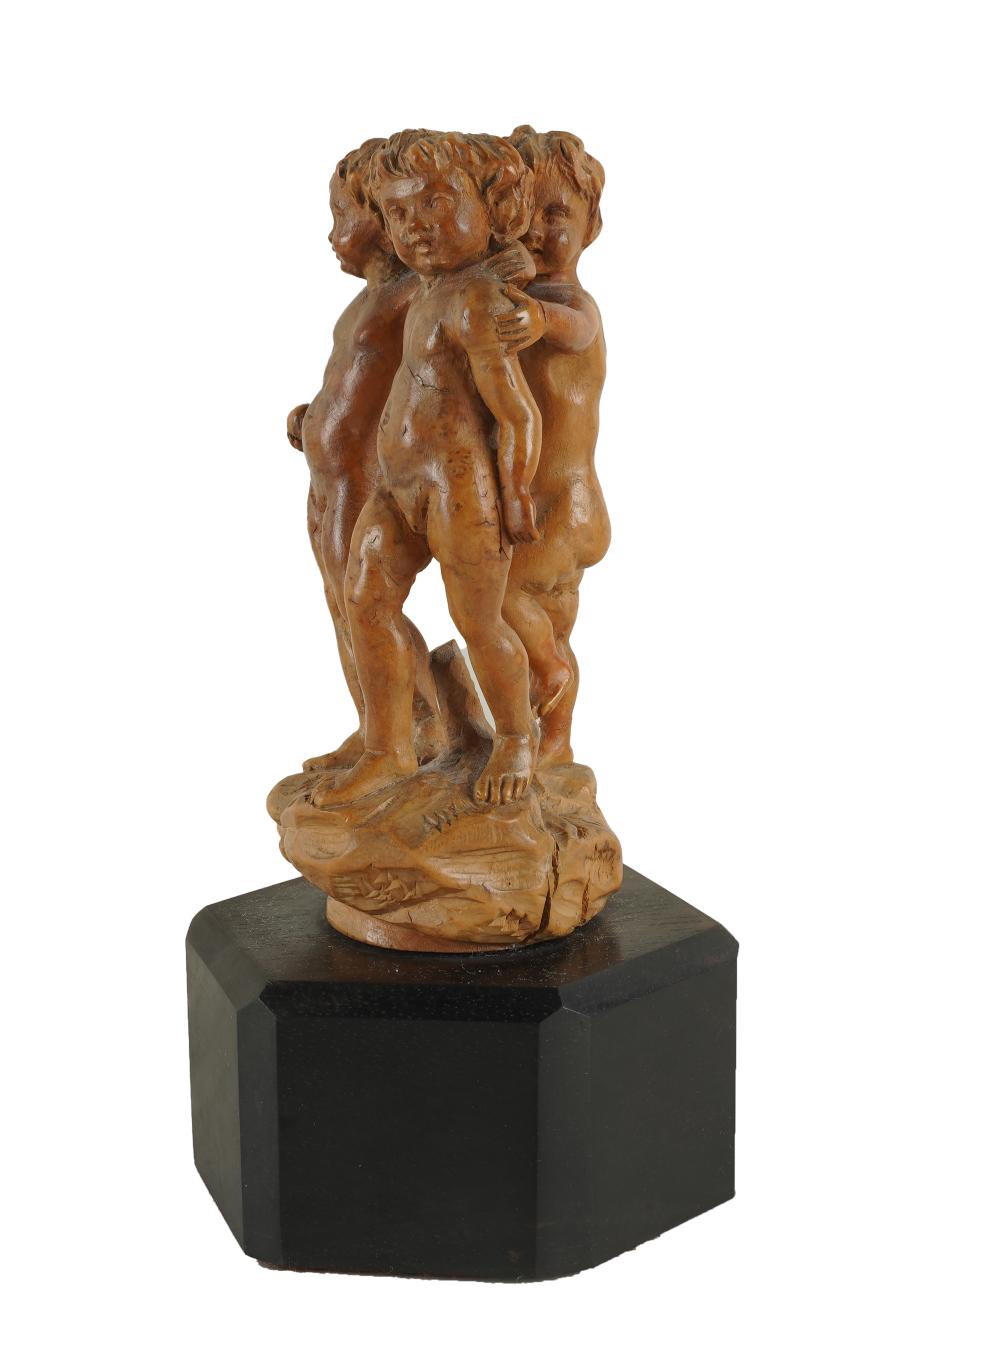 CONTINENTAL CARVED WOOD FIGURAL